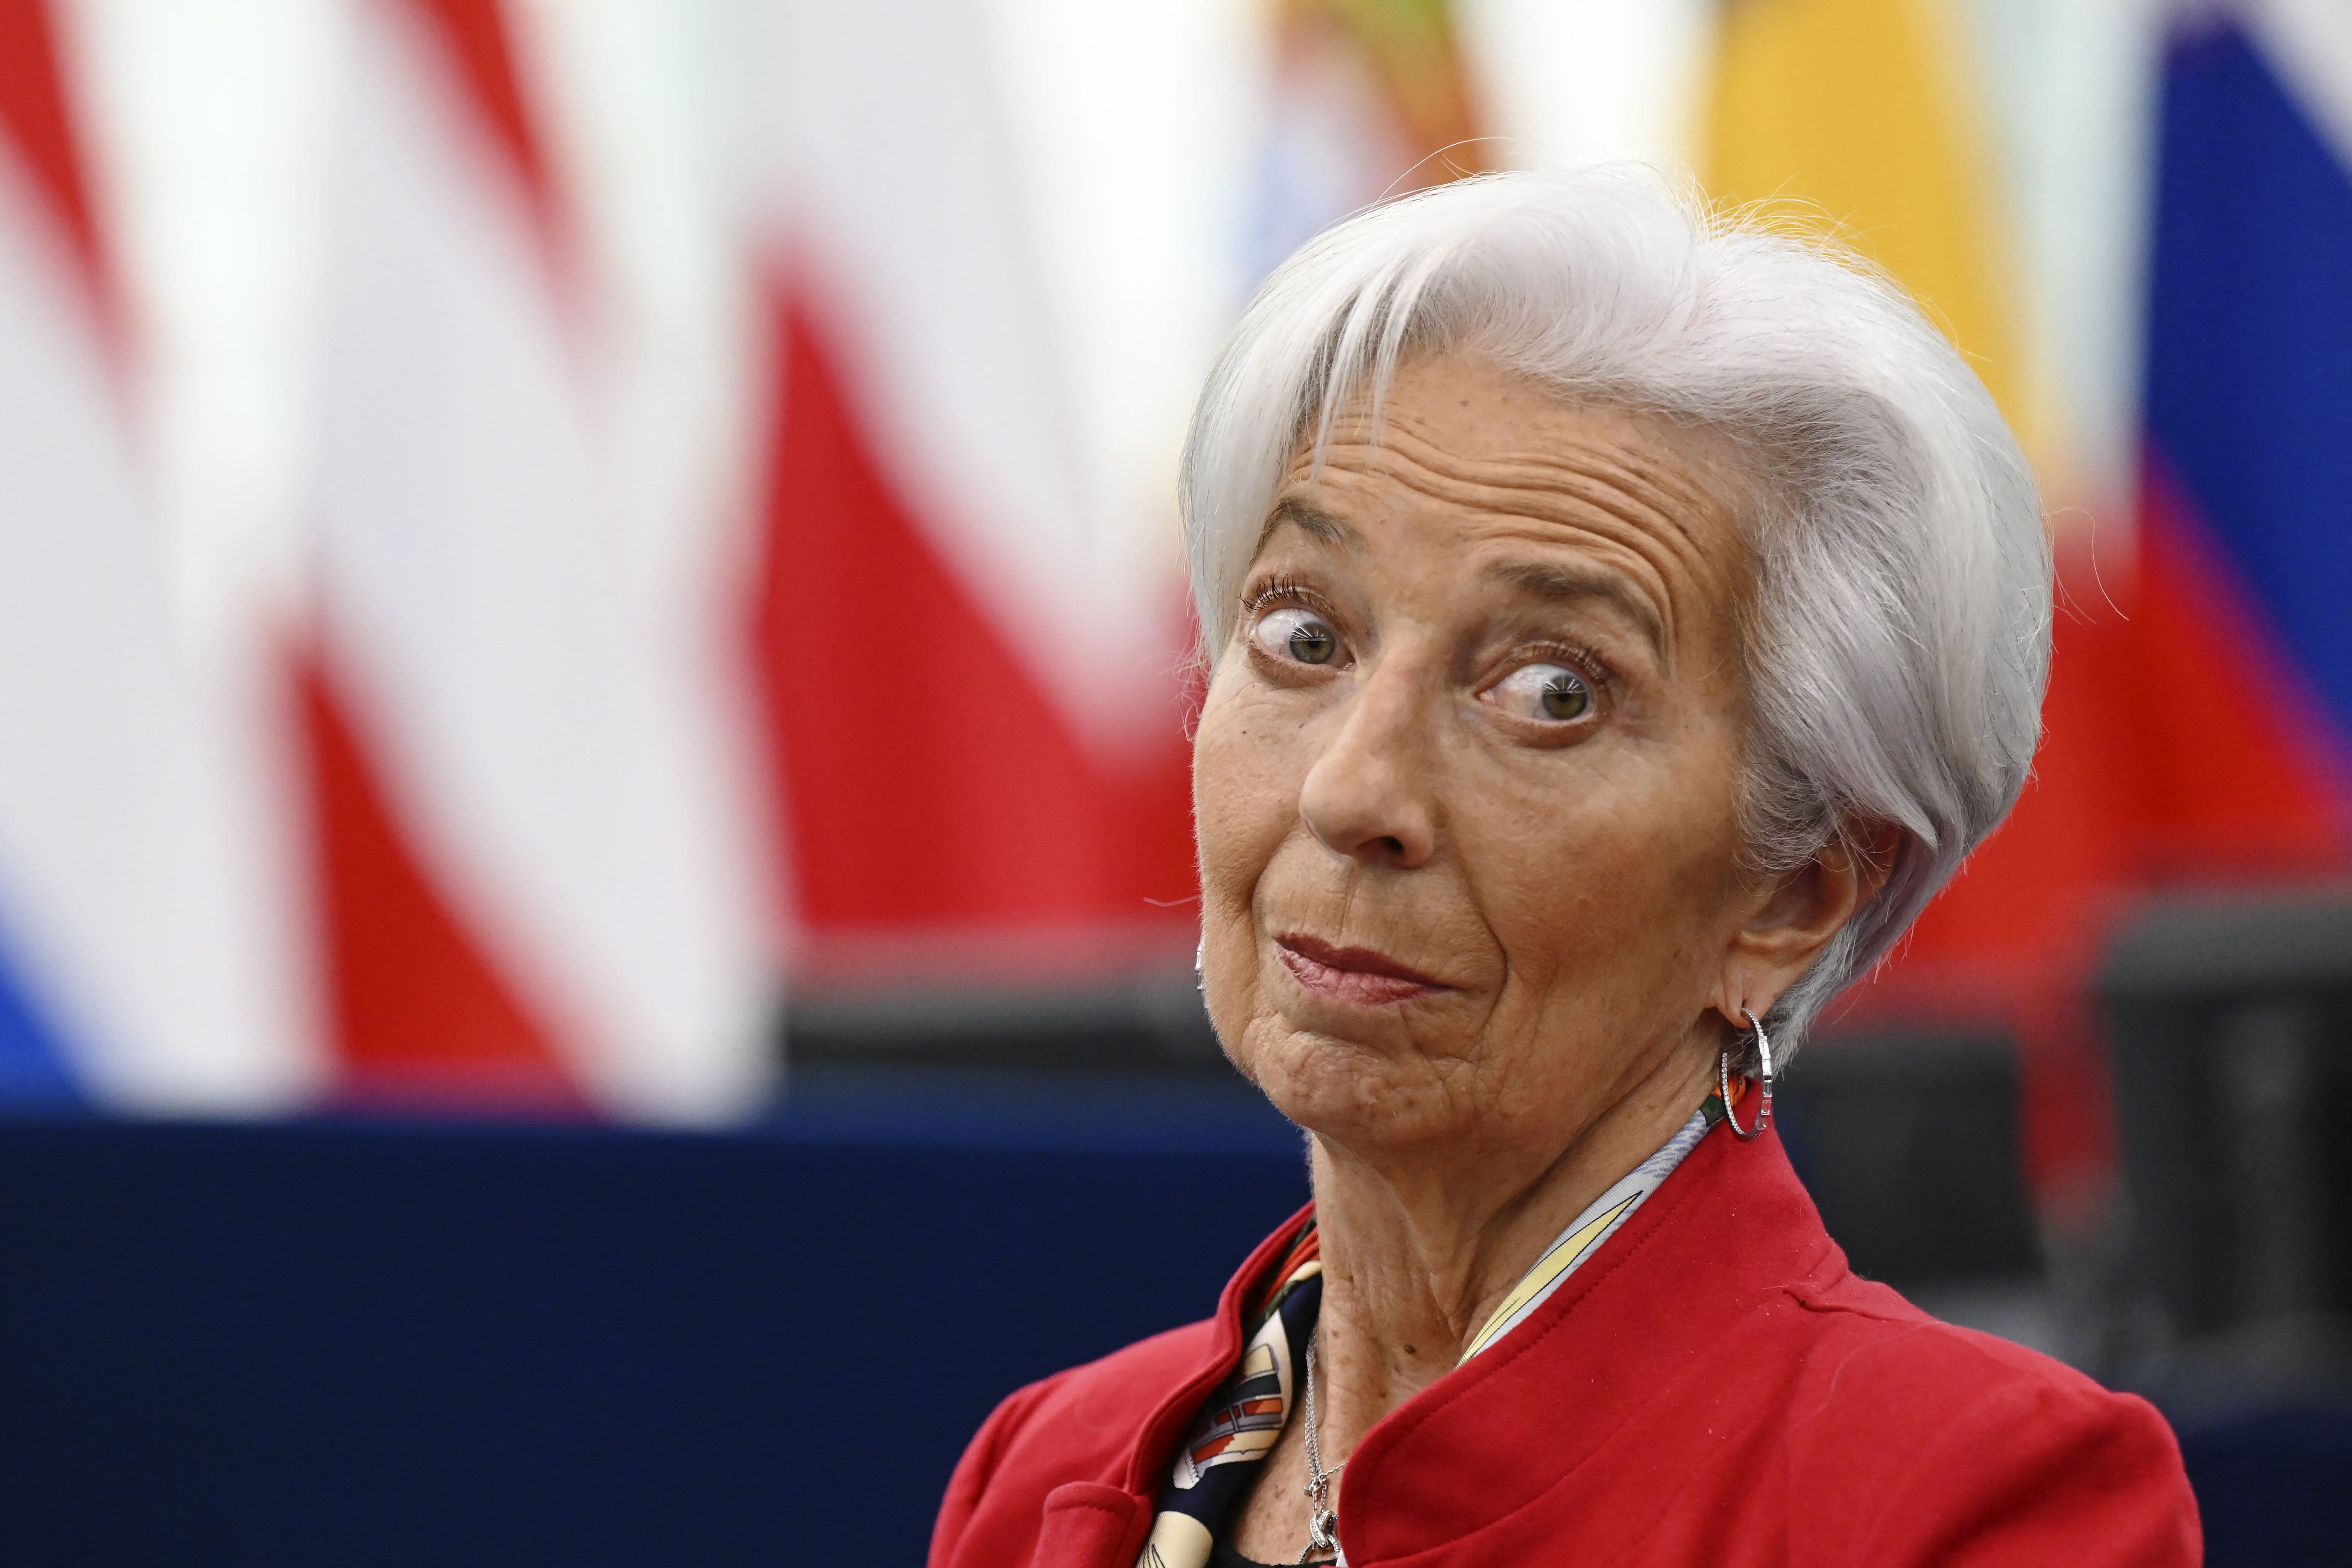 Euro pushes higher as ECB chief Lagarde says inflation remains too high